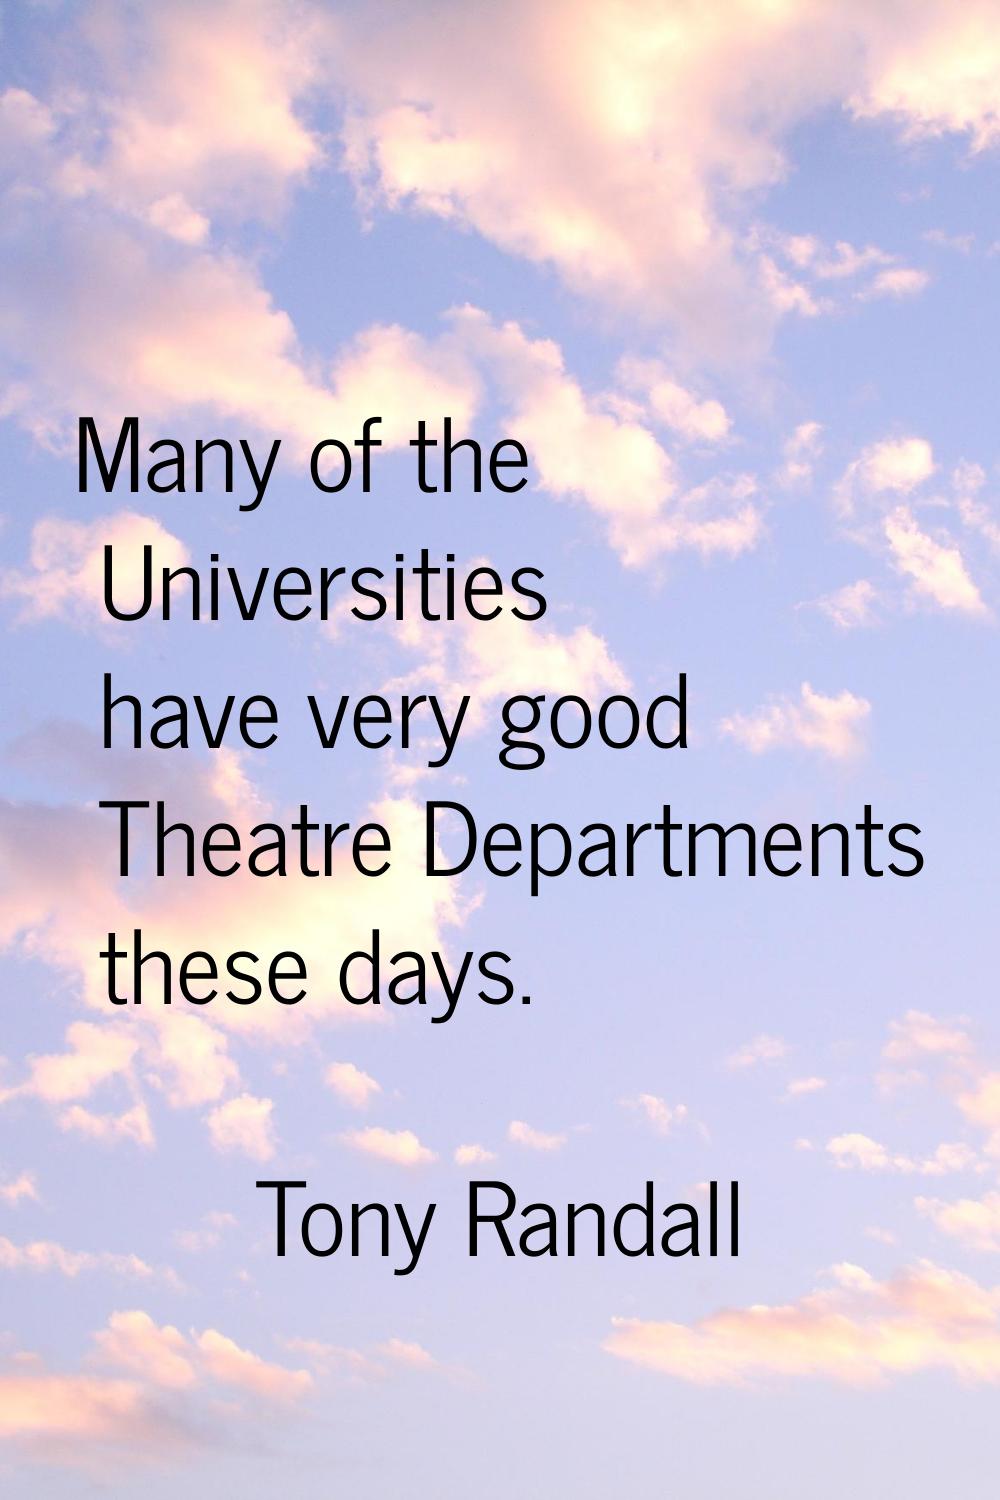 Many of the Universities have very good Theatre Departments these days.